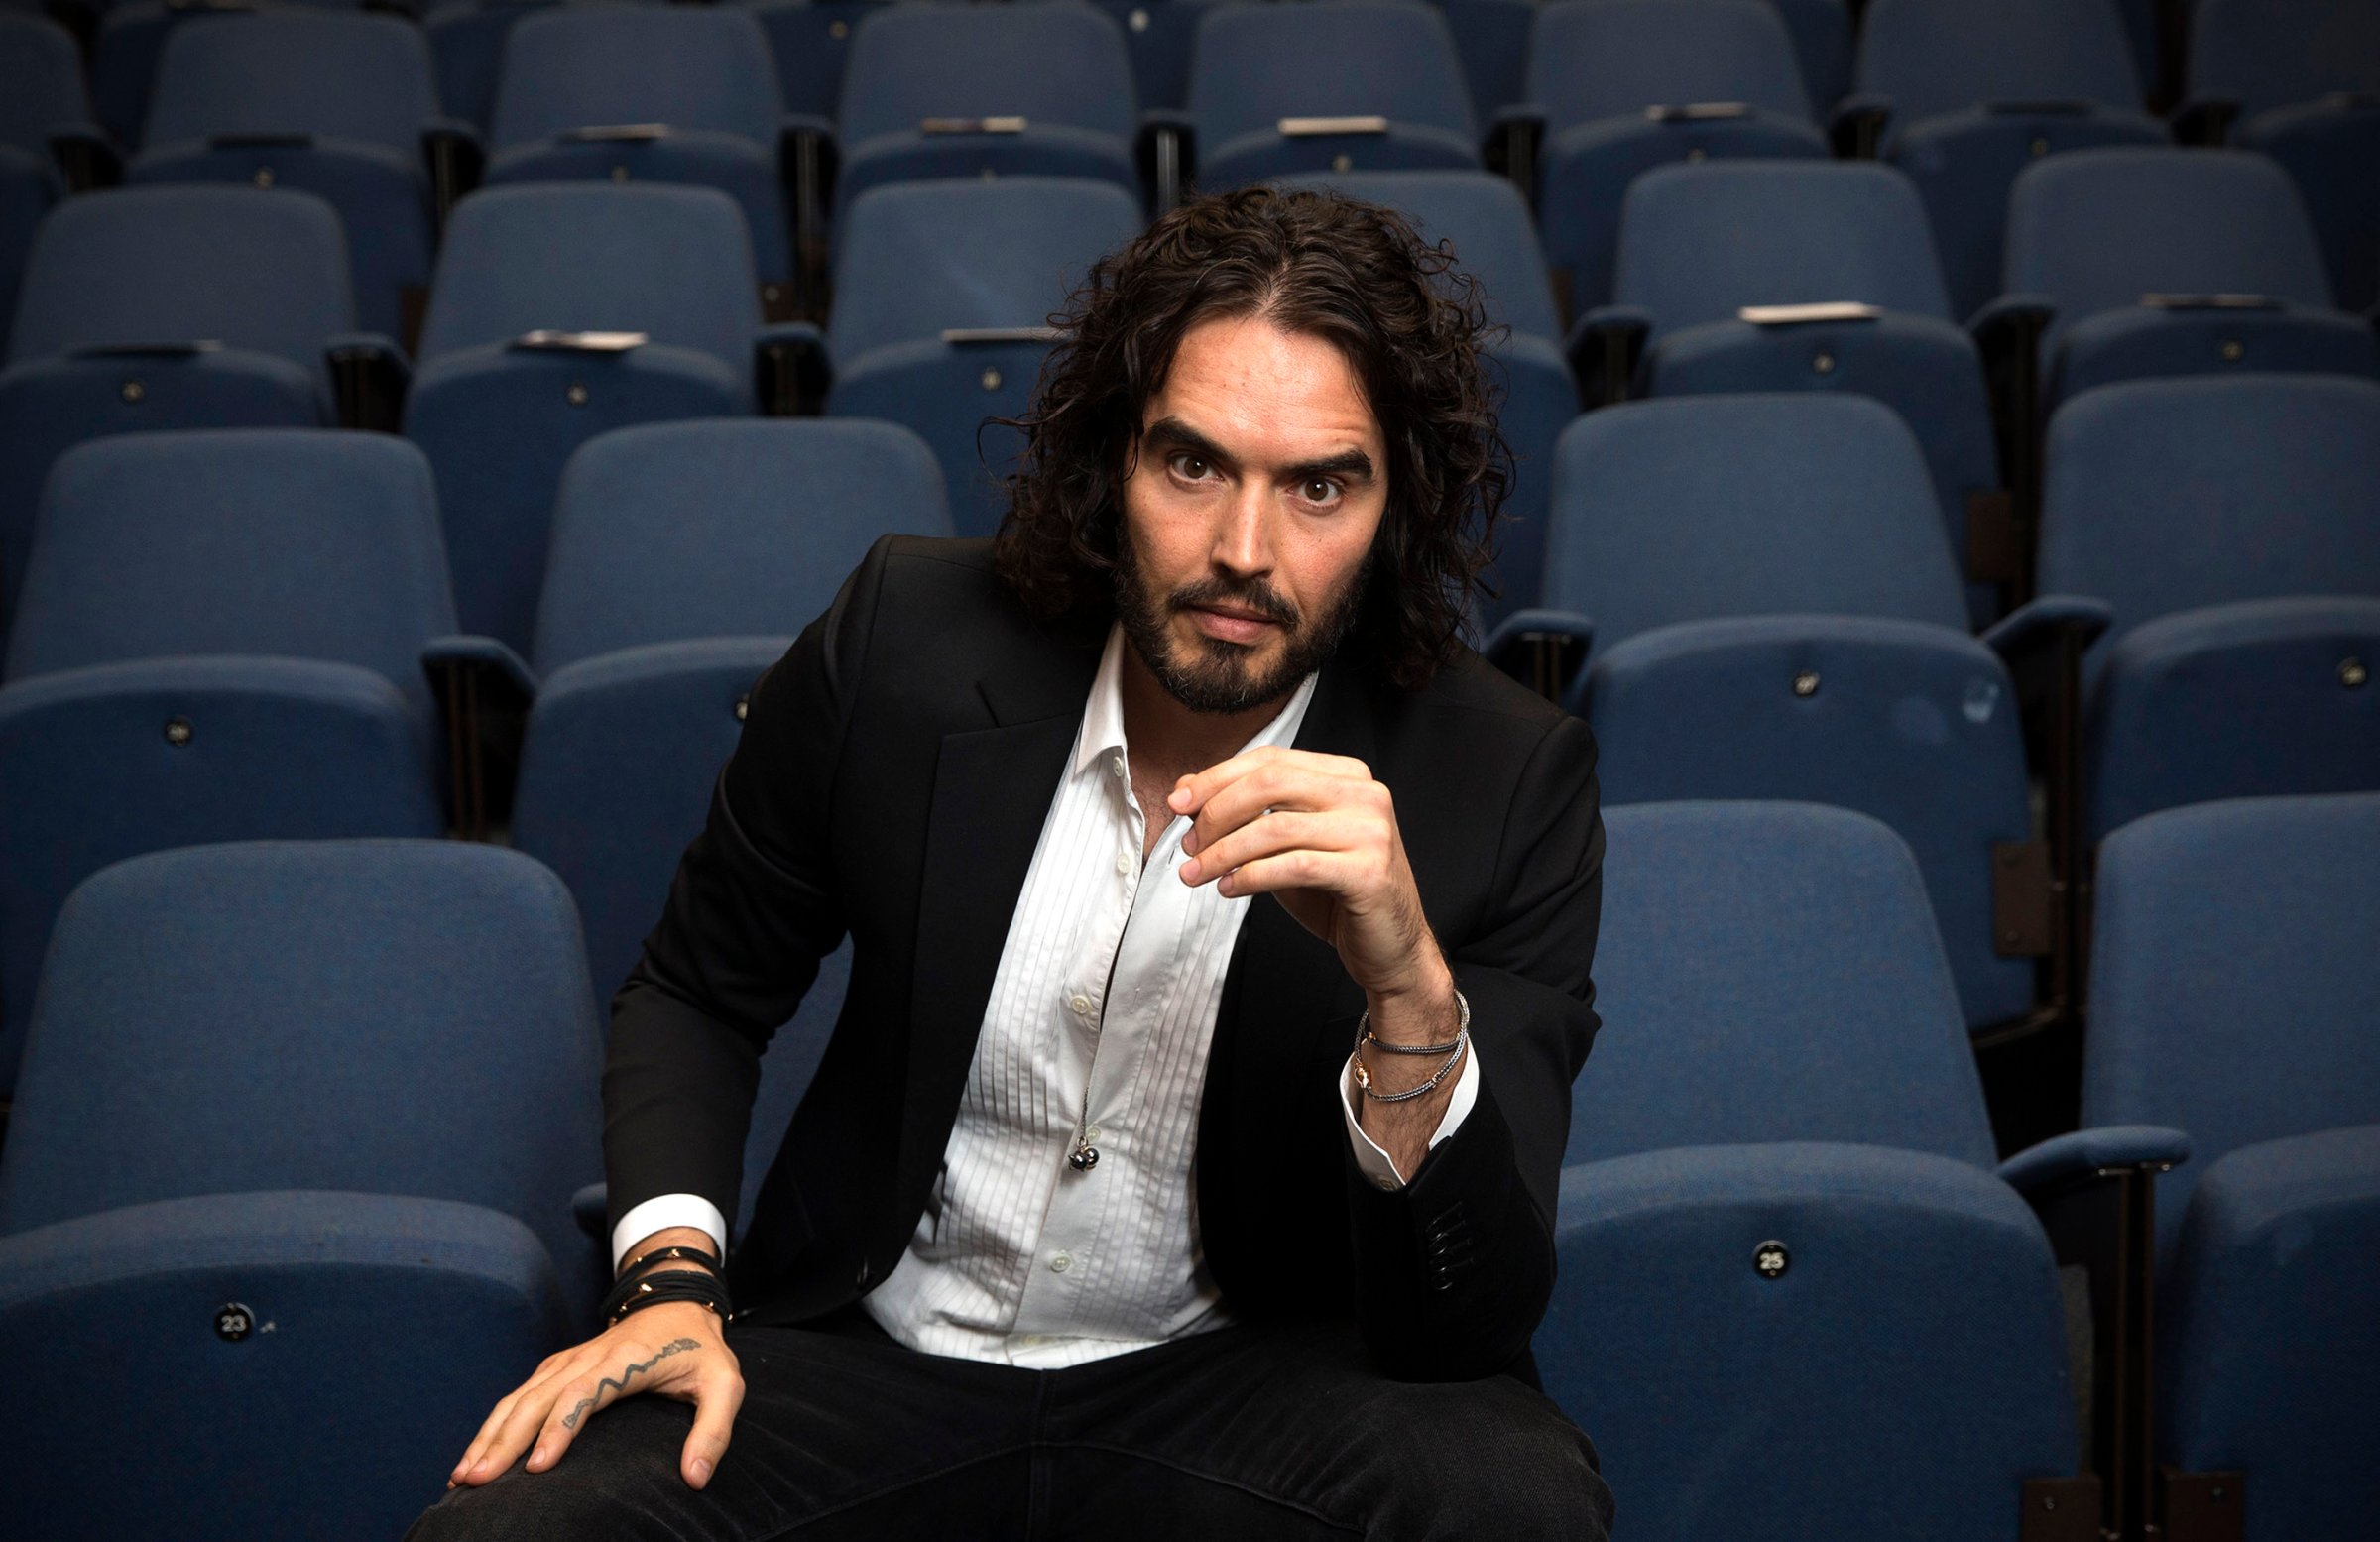 Russell Brand on Nov. 25, 2014 in London.